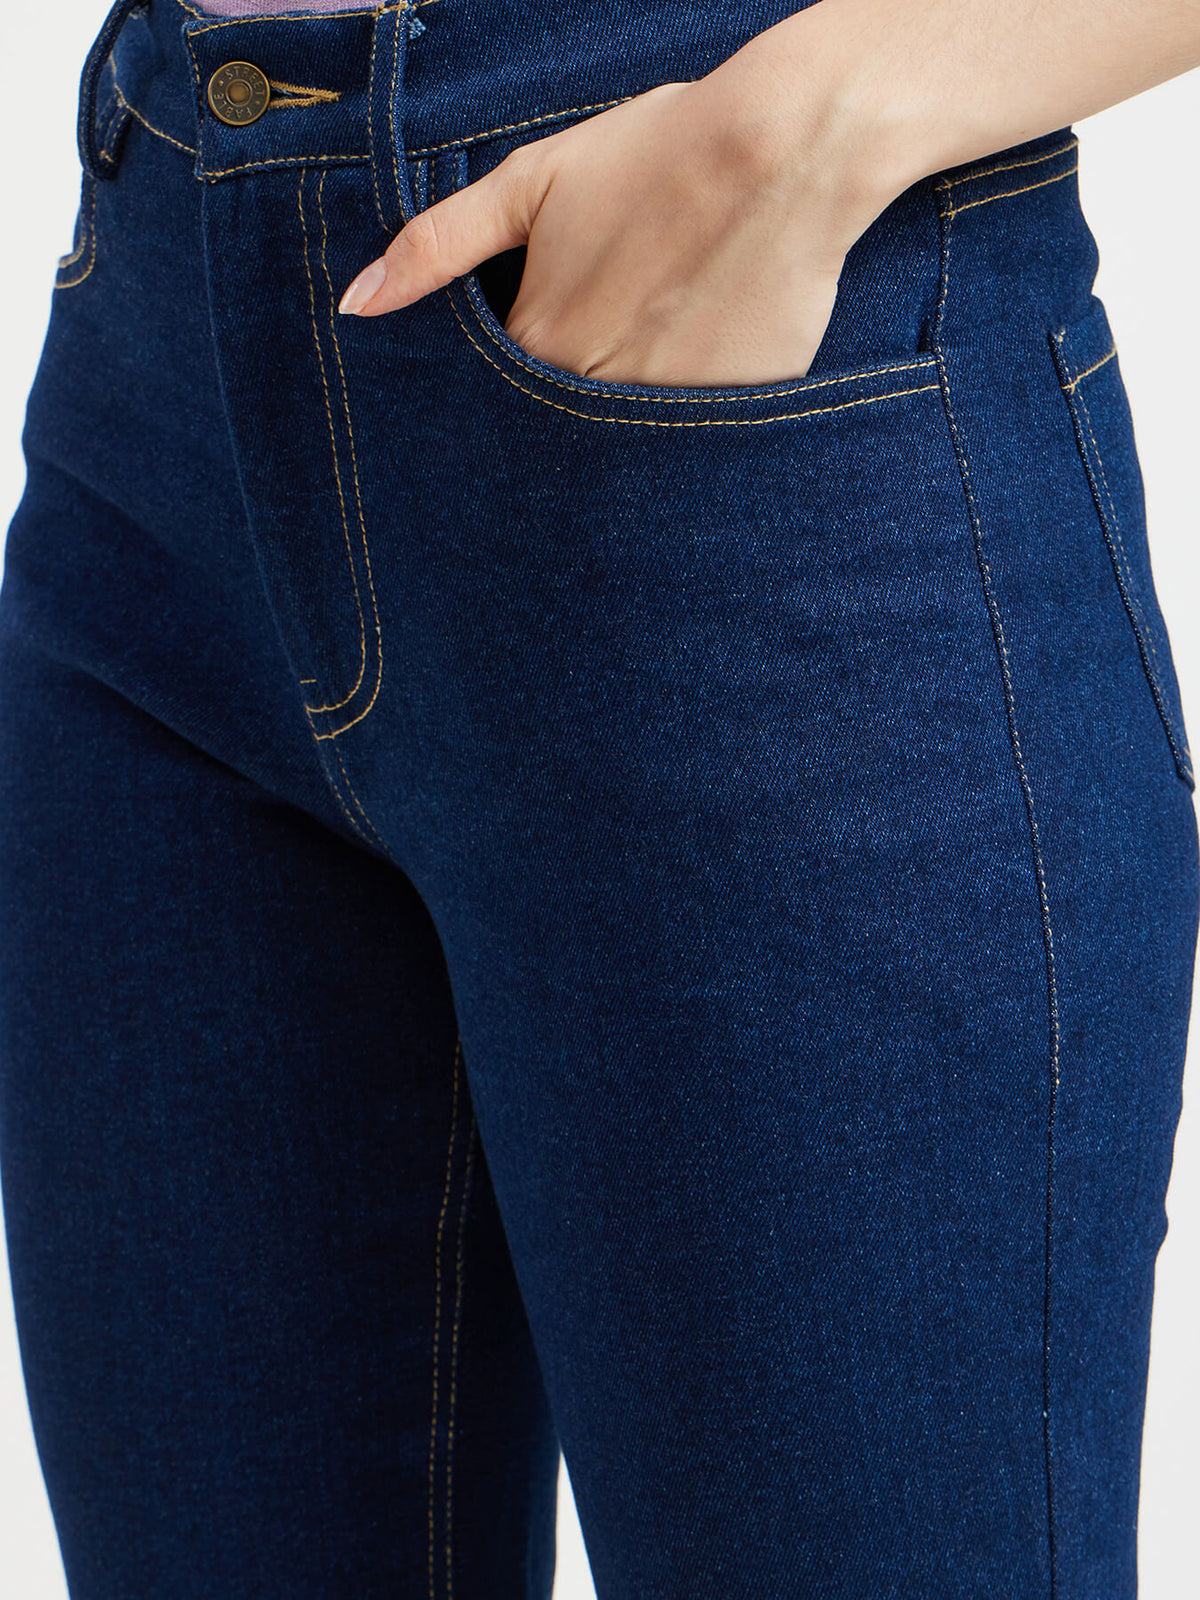 Straight Fit Jeans - Navy Blue